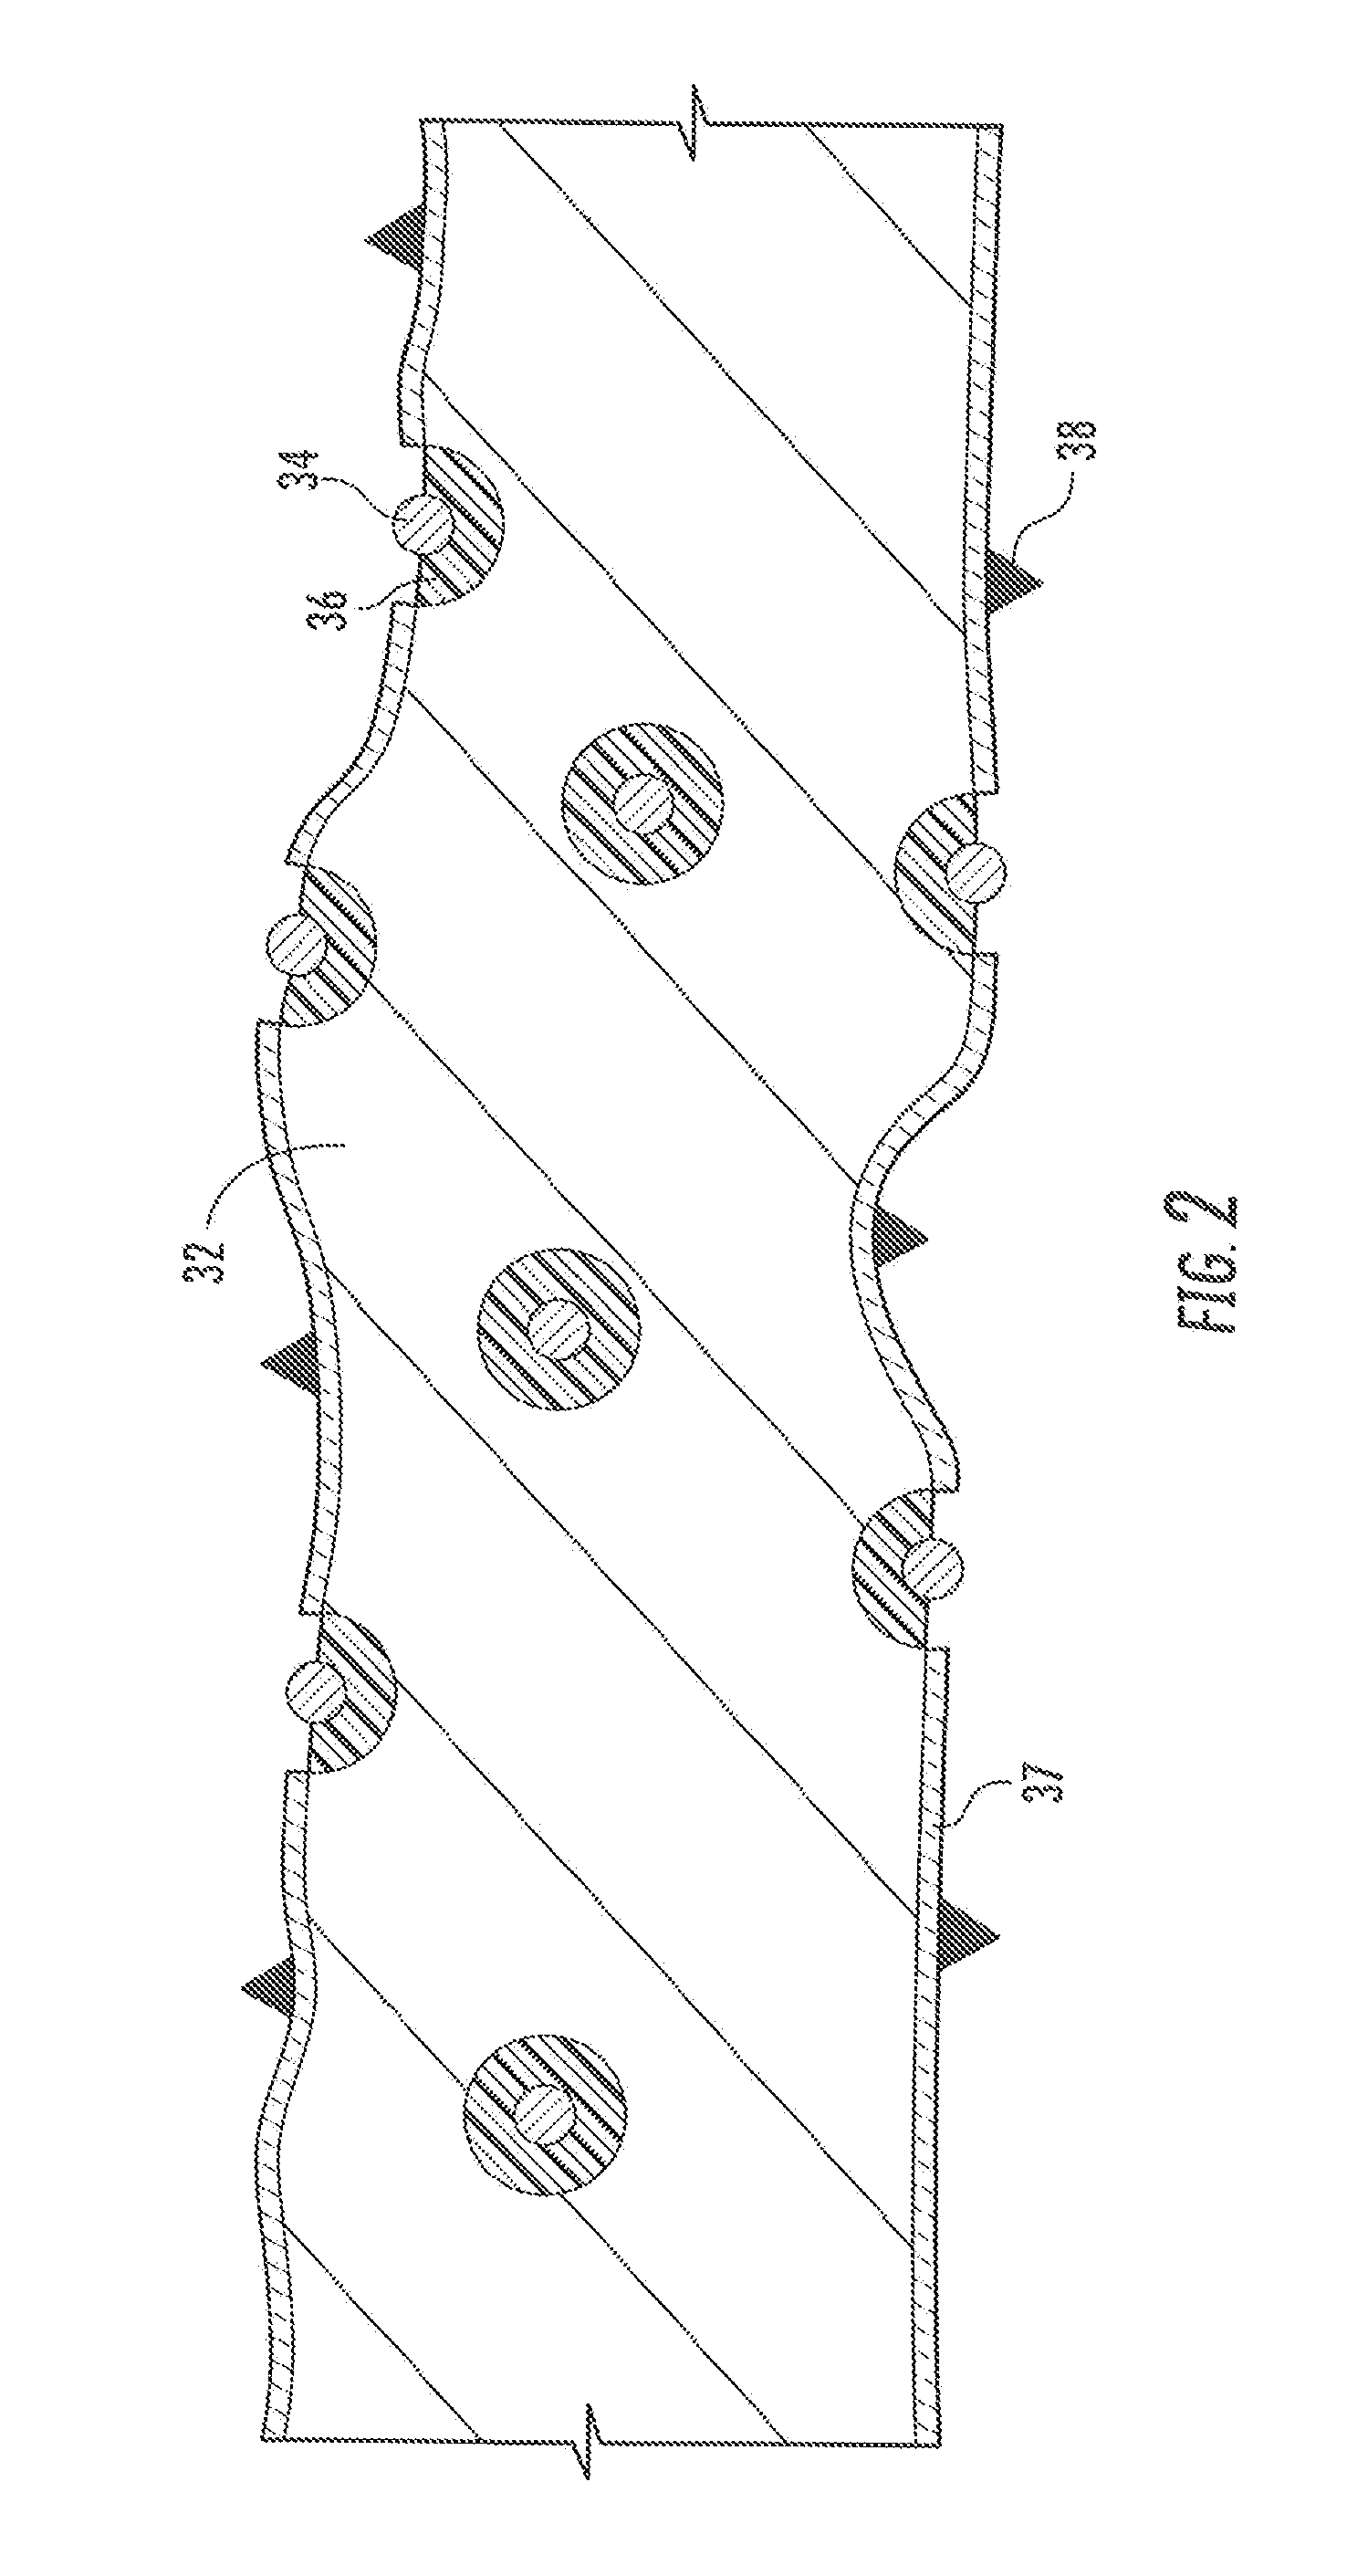 Filter Element Comprising Multifunctional Fibrous Smoke-Altering Material